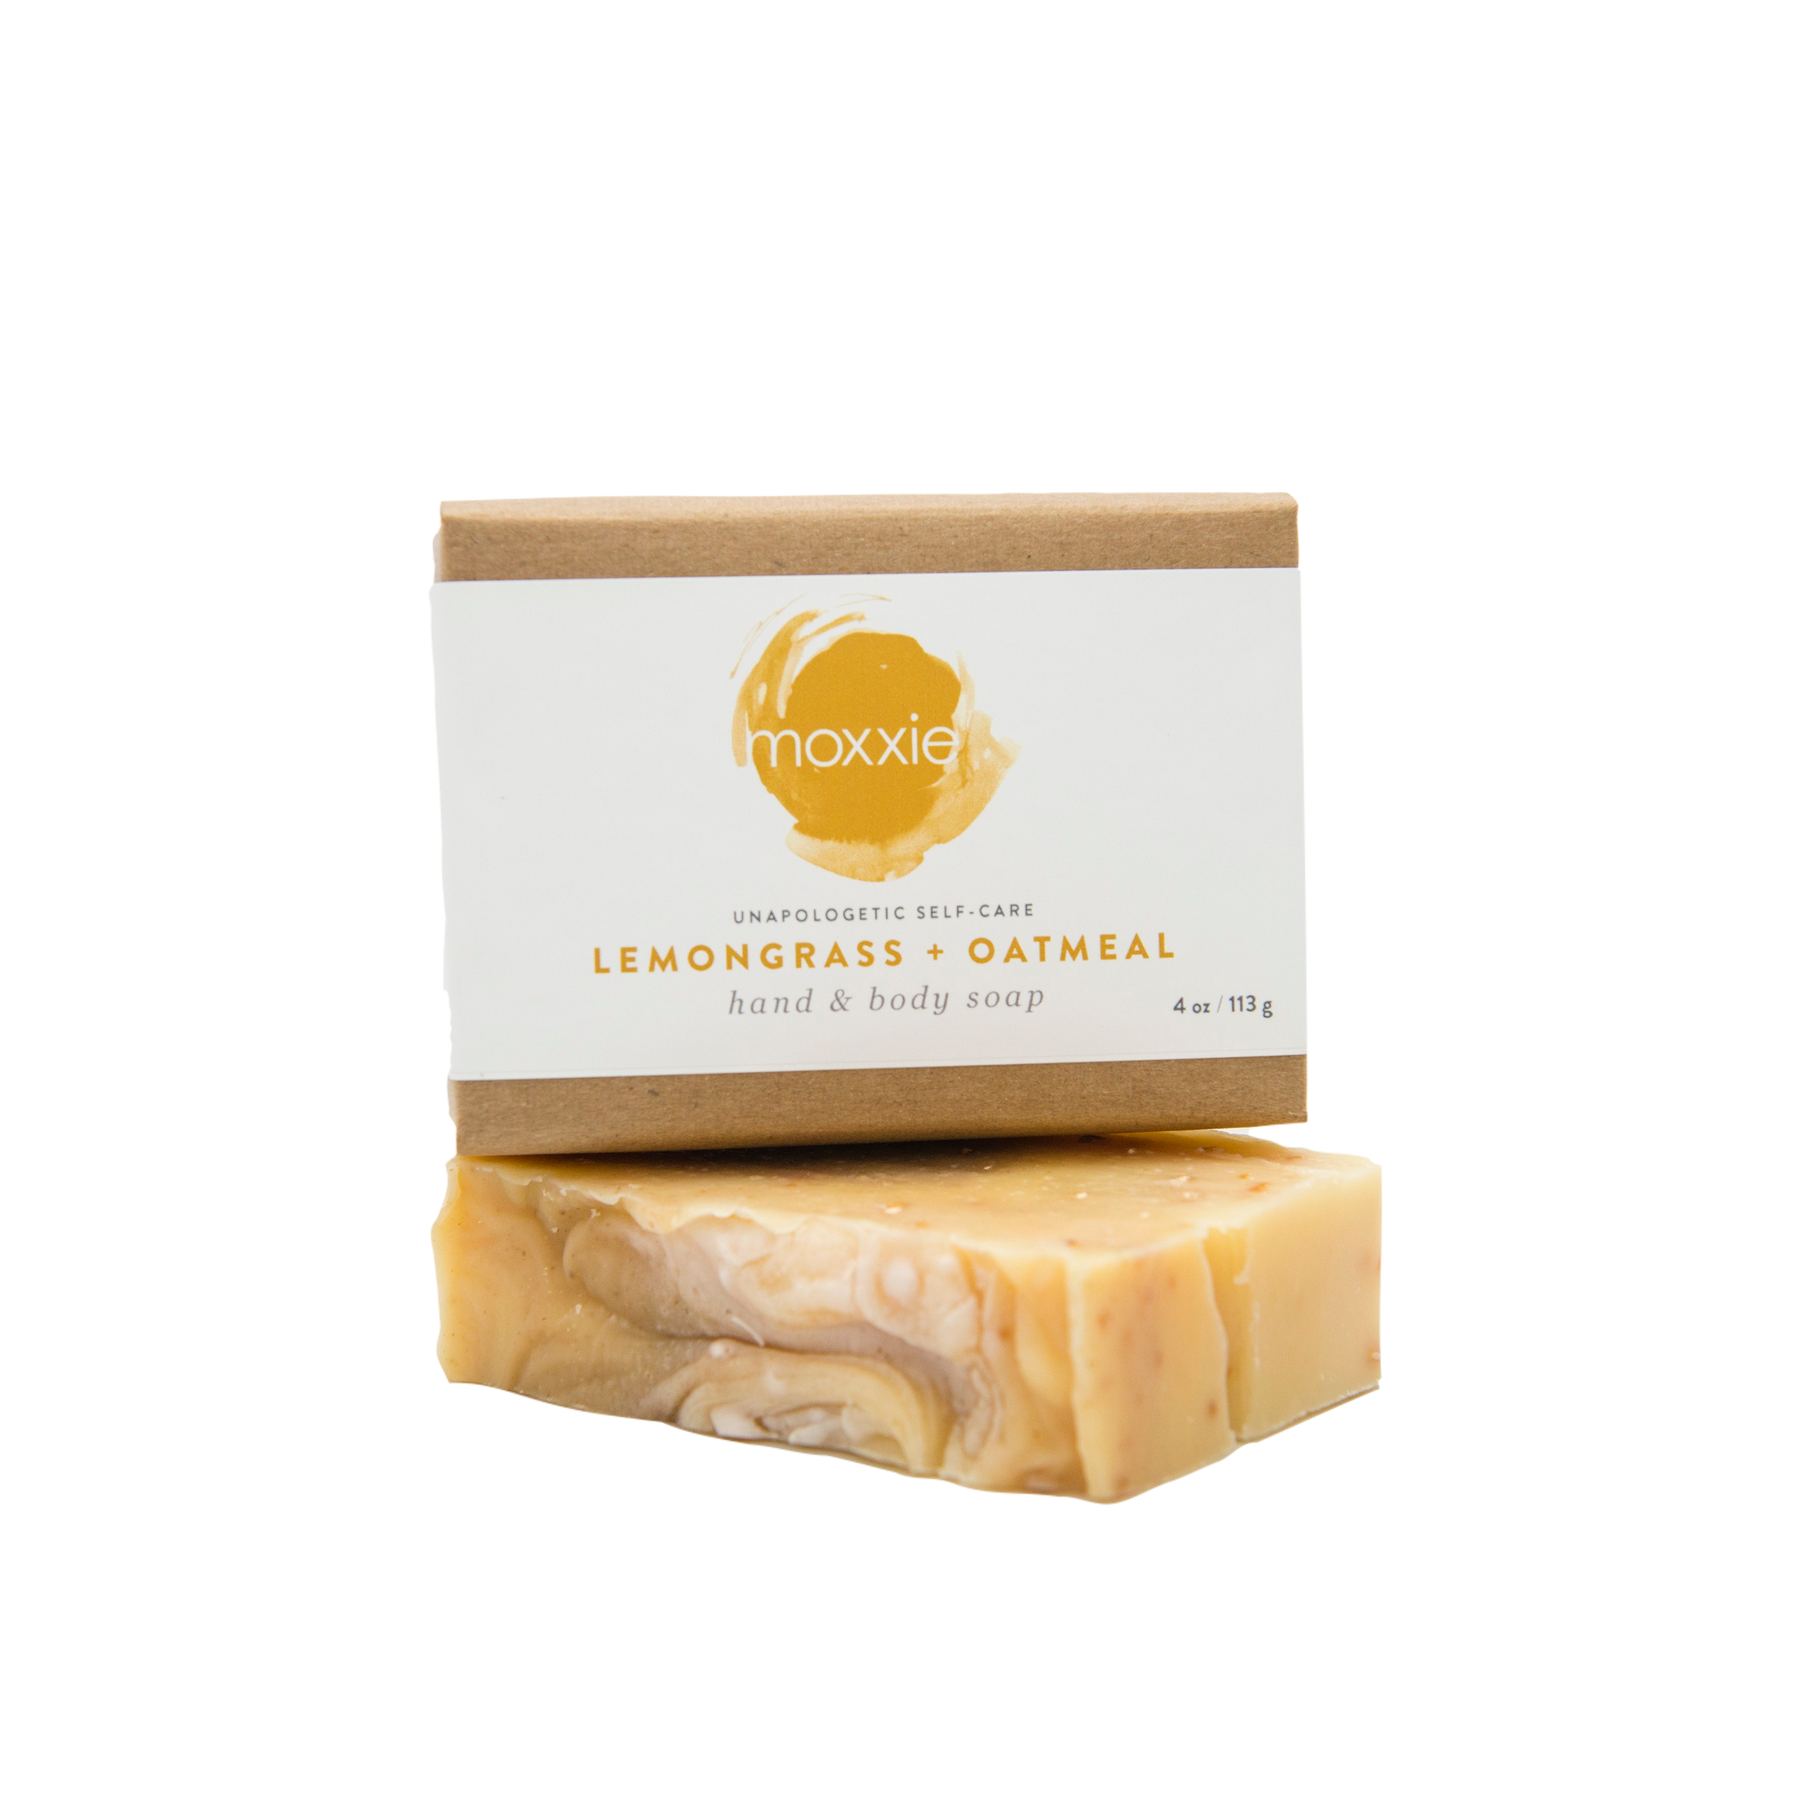 Moxxie all natural, handcrafted 100% botanical Bar Soap - Lemongrass and Oatmeal